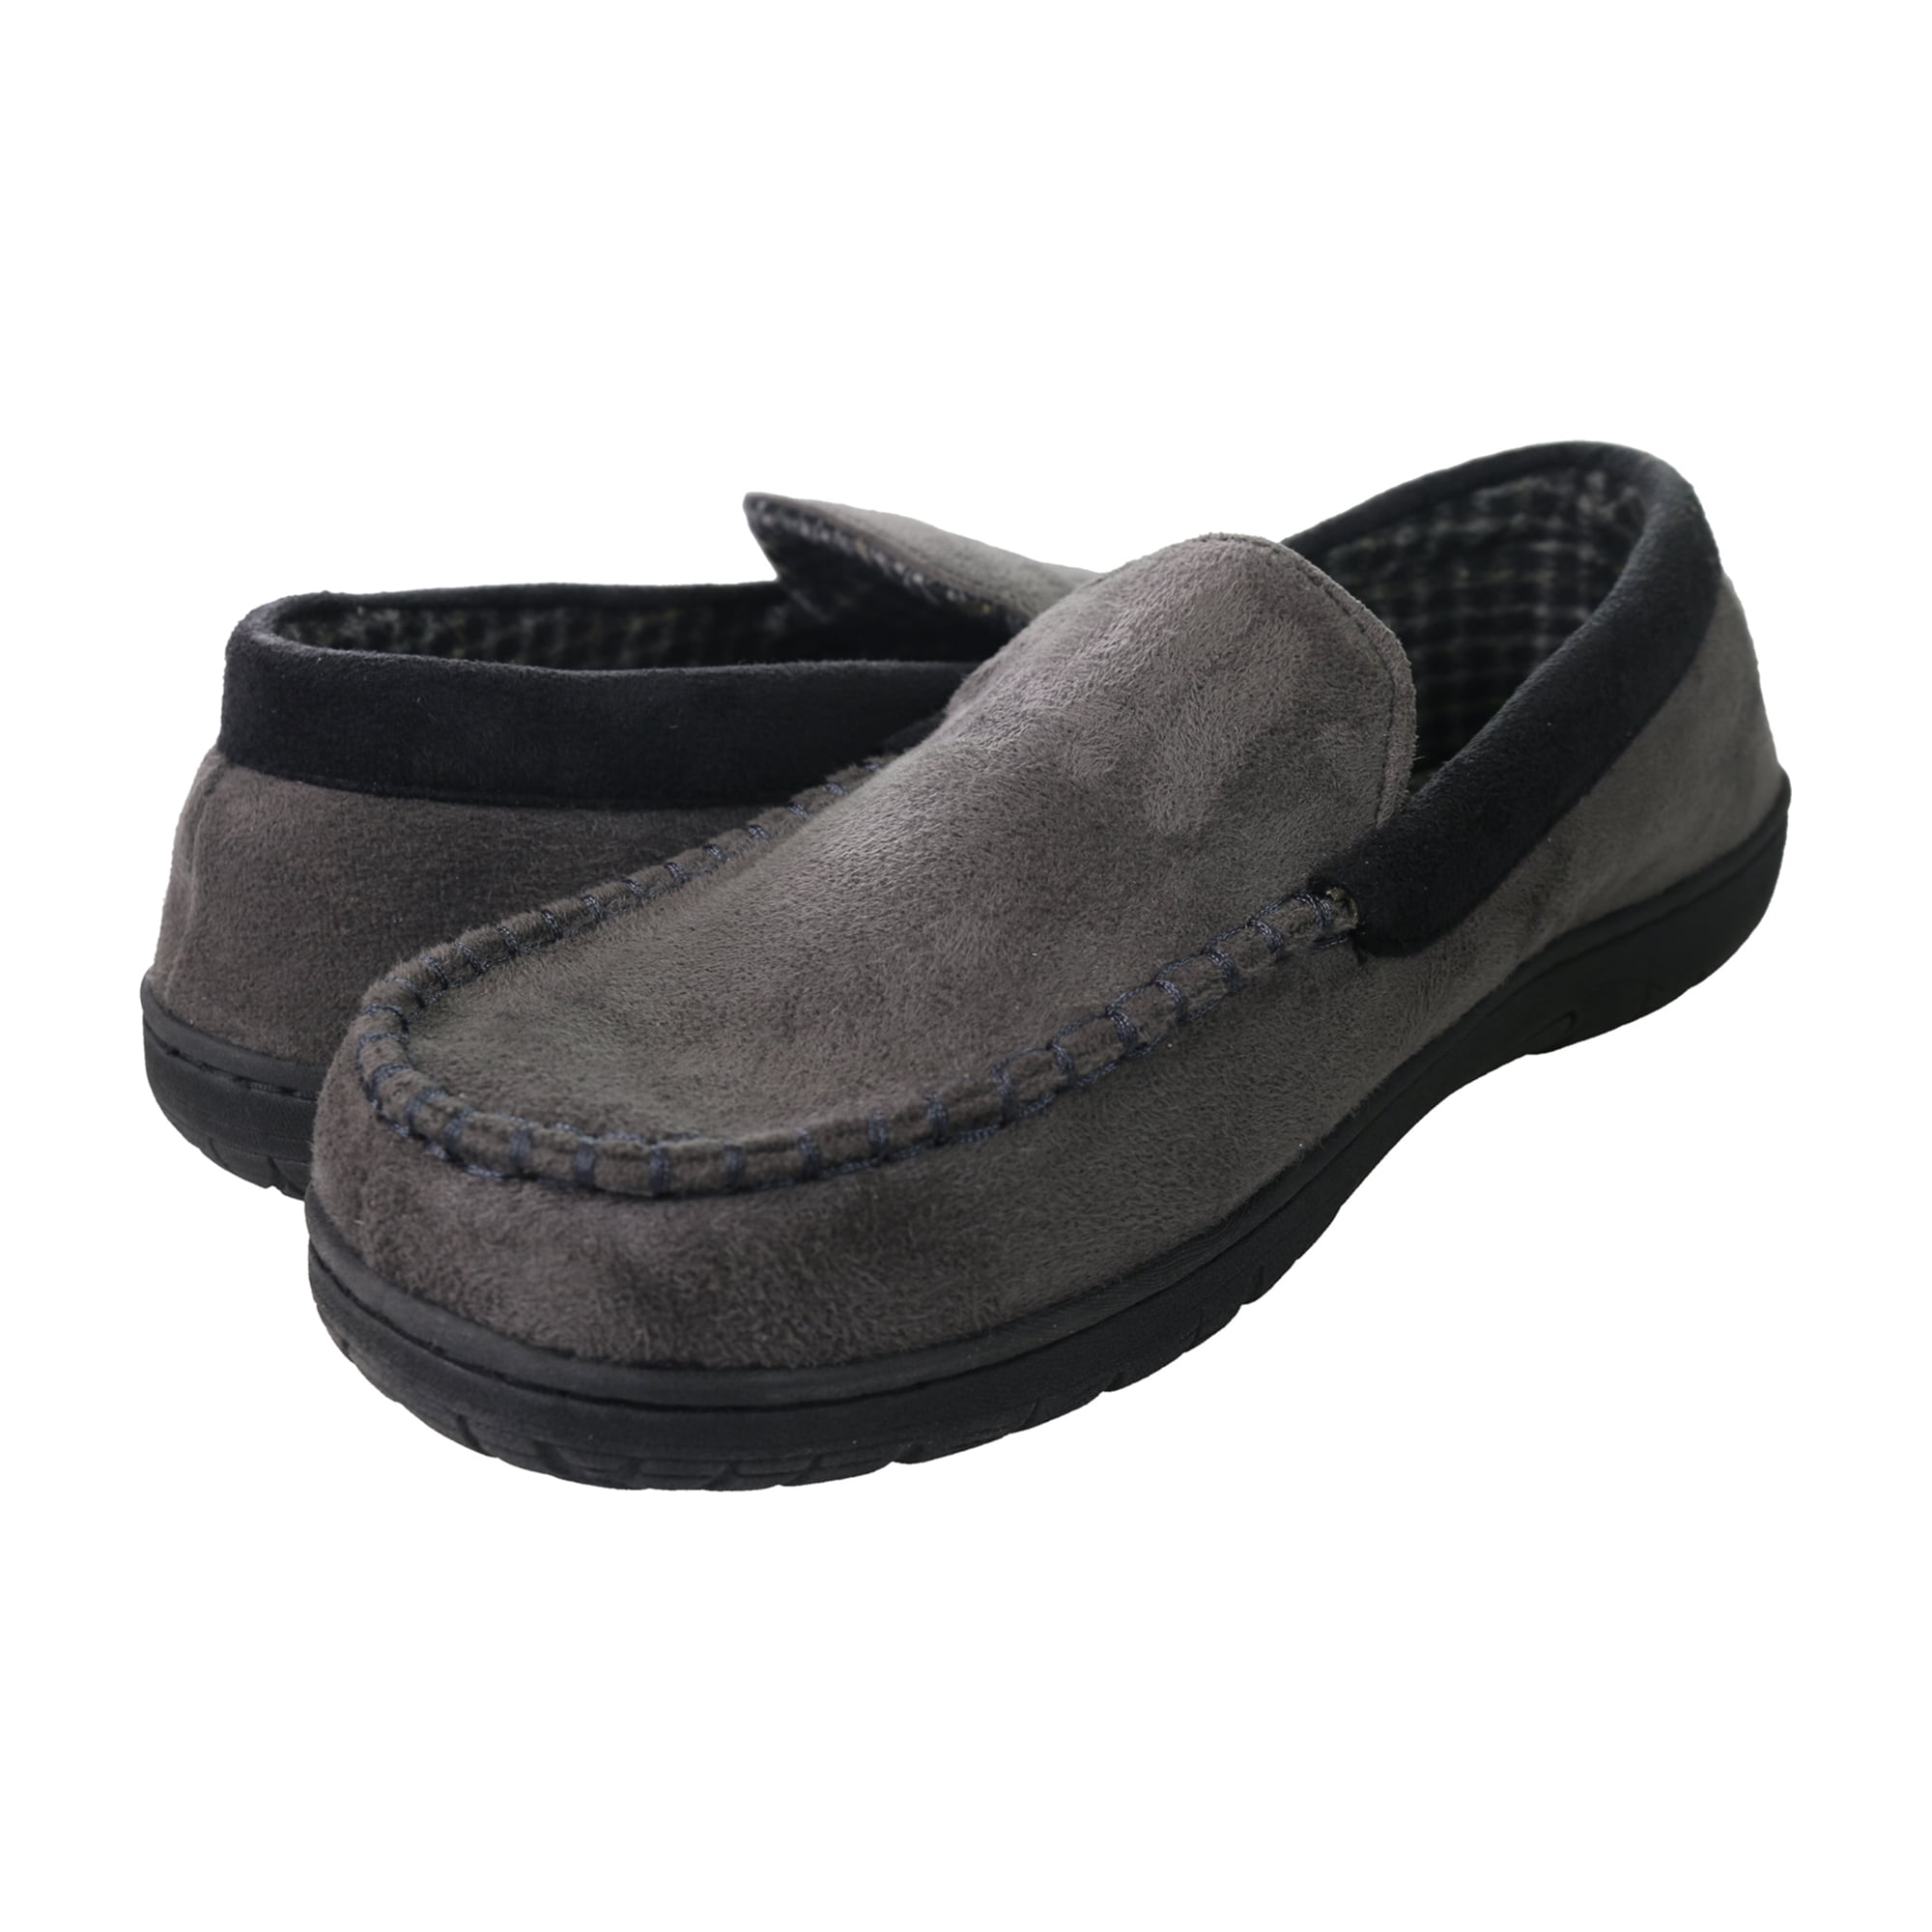 MRSP $38.99 Mens 32 Degrees Heat tan or brown Moccasin Slippers Thinsulate 